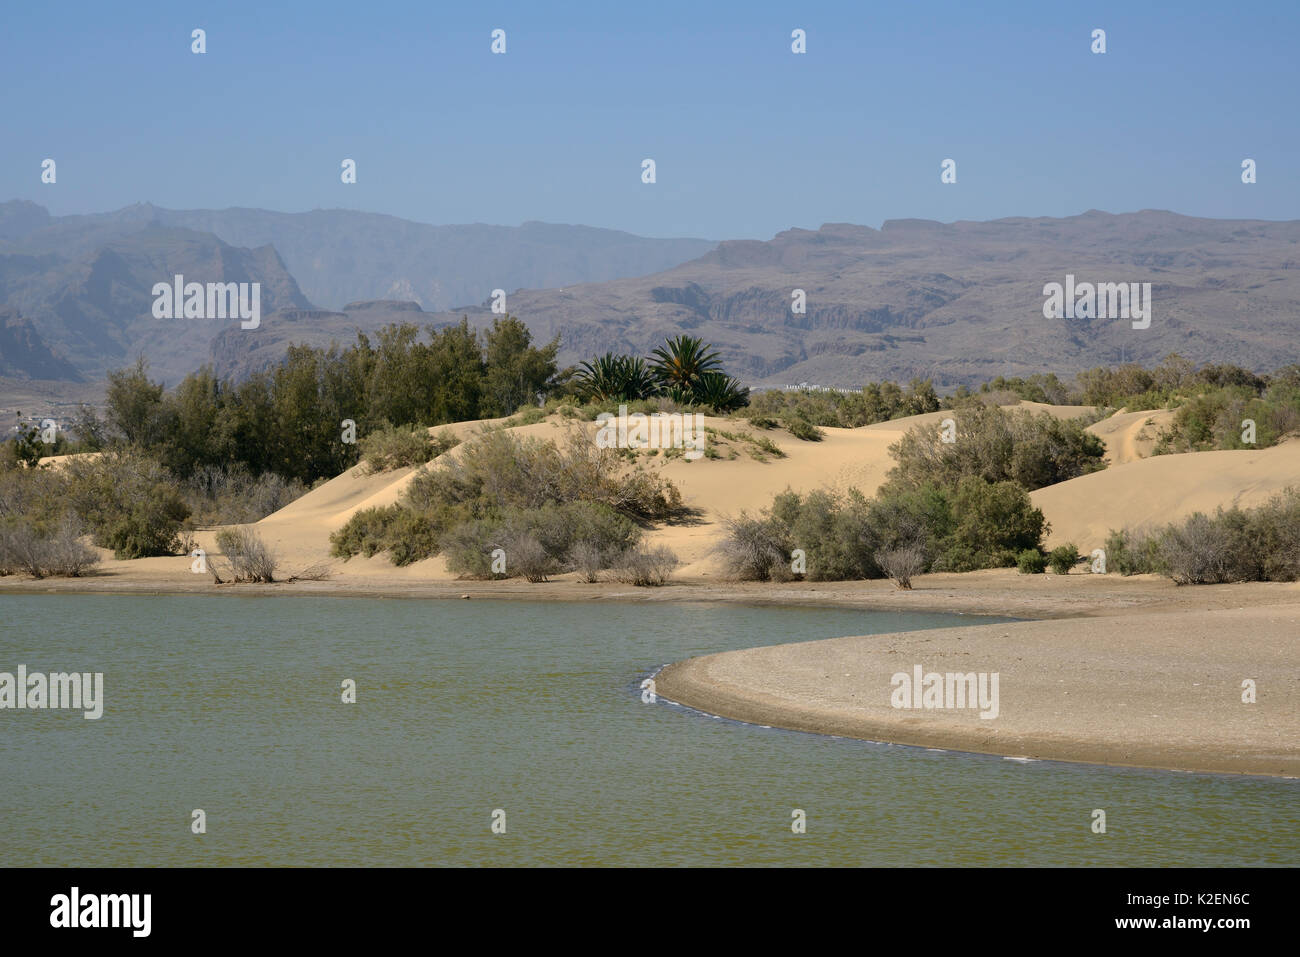 La Charca lagoon, an oasis within a large area of sand dunes, Maspalomas. Gran Canaria, UNESCO Biosphere Reserve, Gran Canaria. Canary Islands. May 2016. Stock Photo